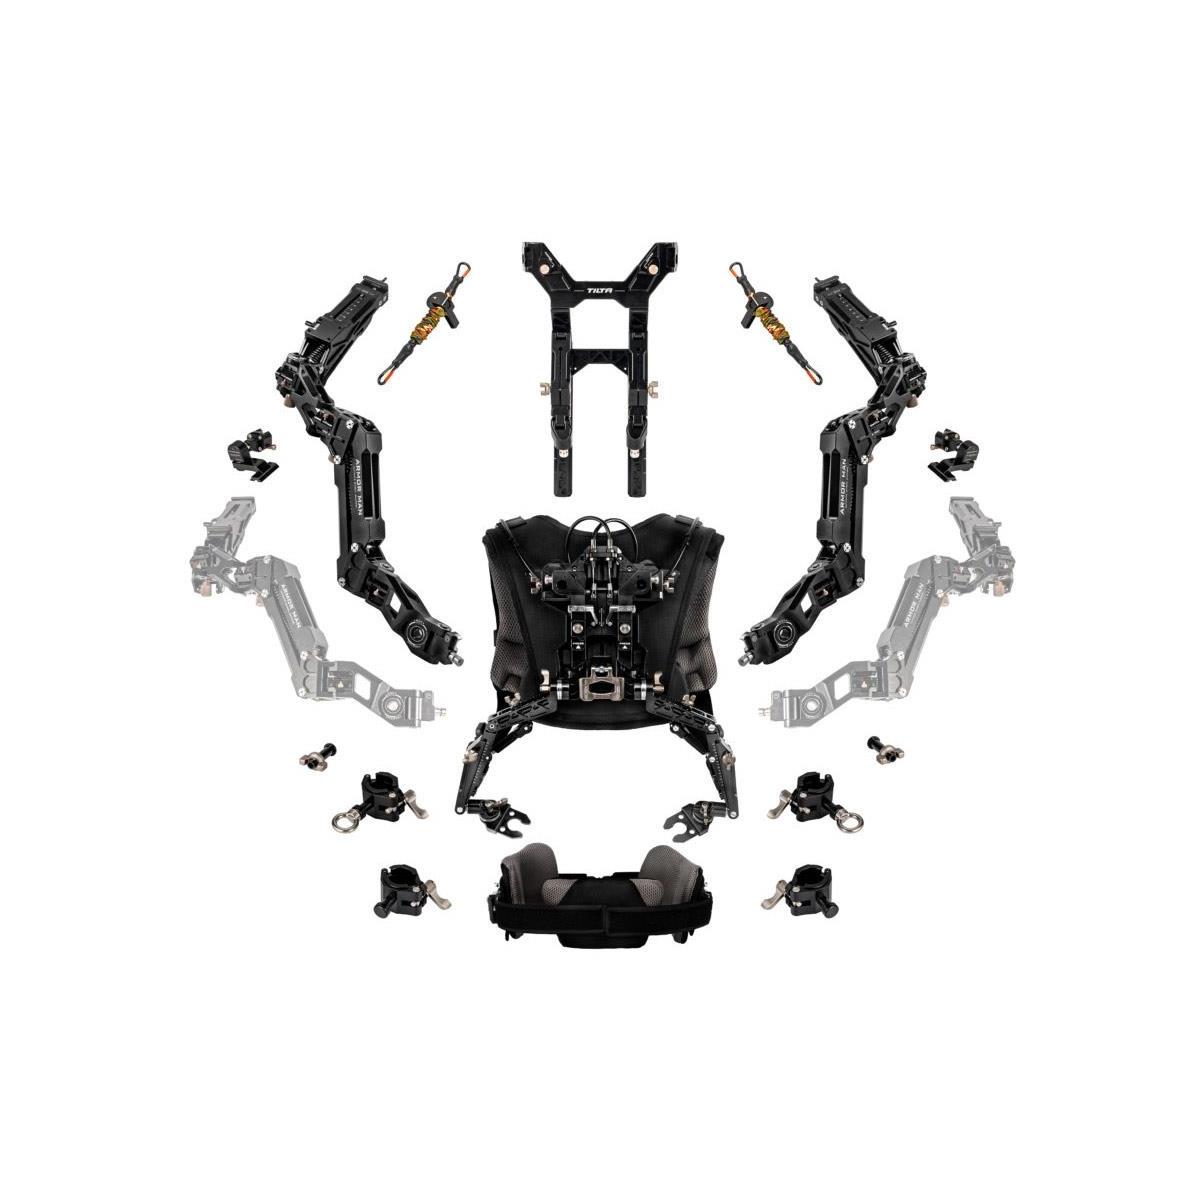 Image of Tilta Armor Man 3.0 Gimbal Support System